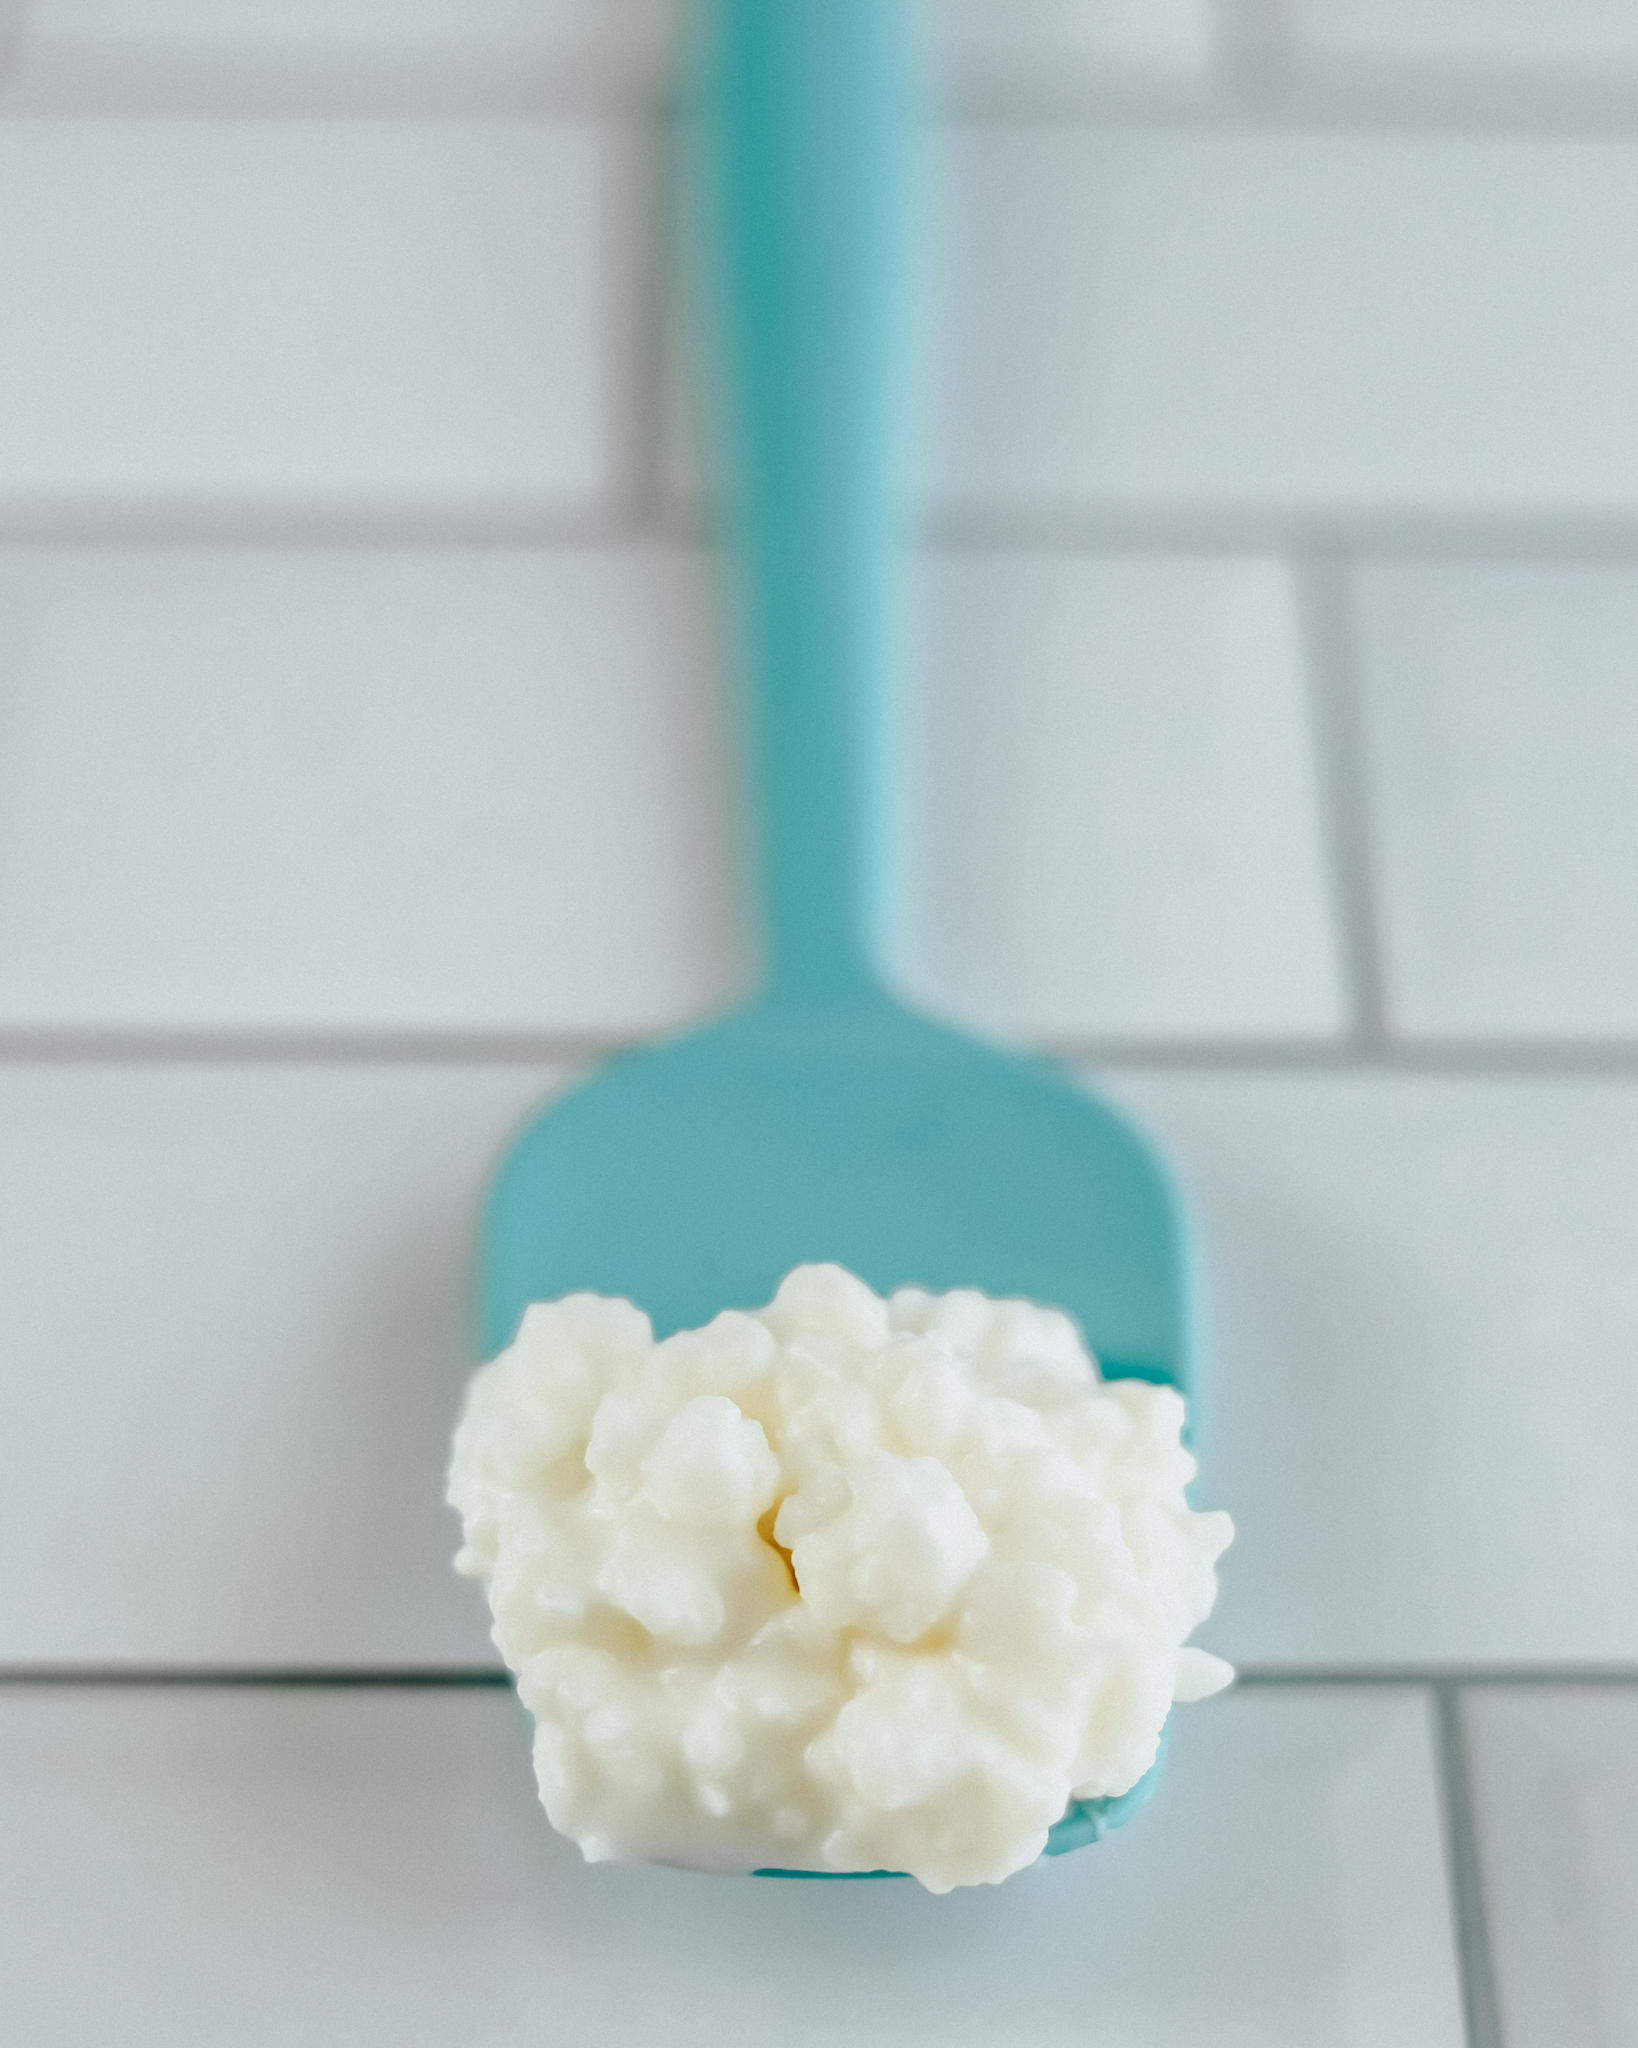 Turqoise silicone spatula holds a tablespoon of freshly strained kefir grains.